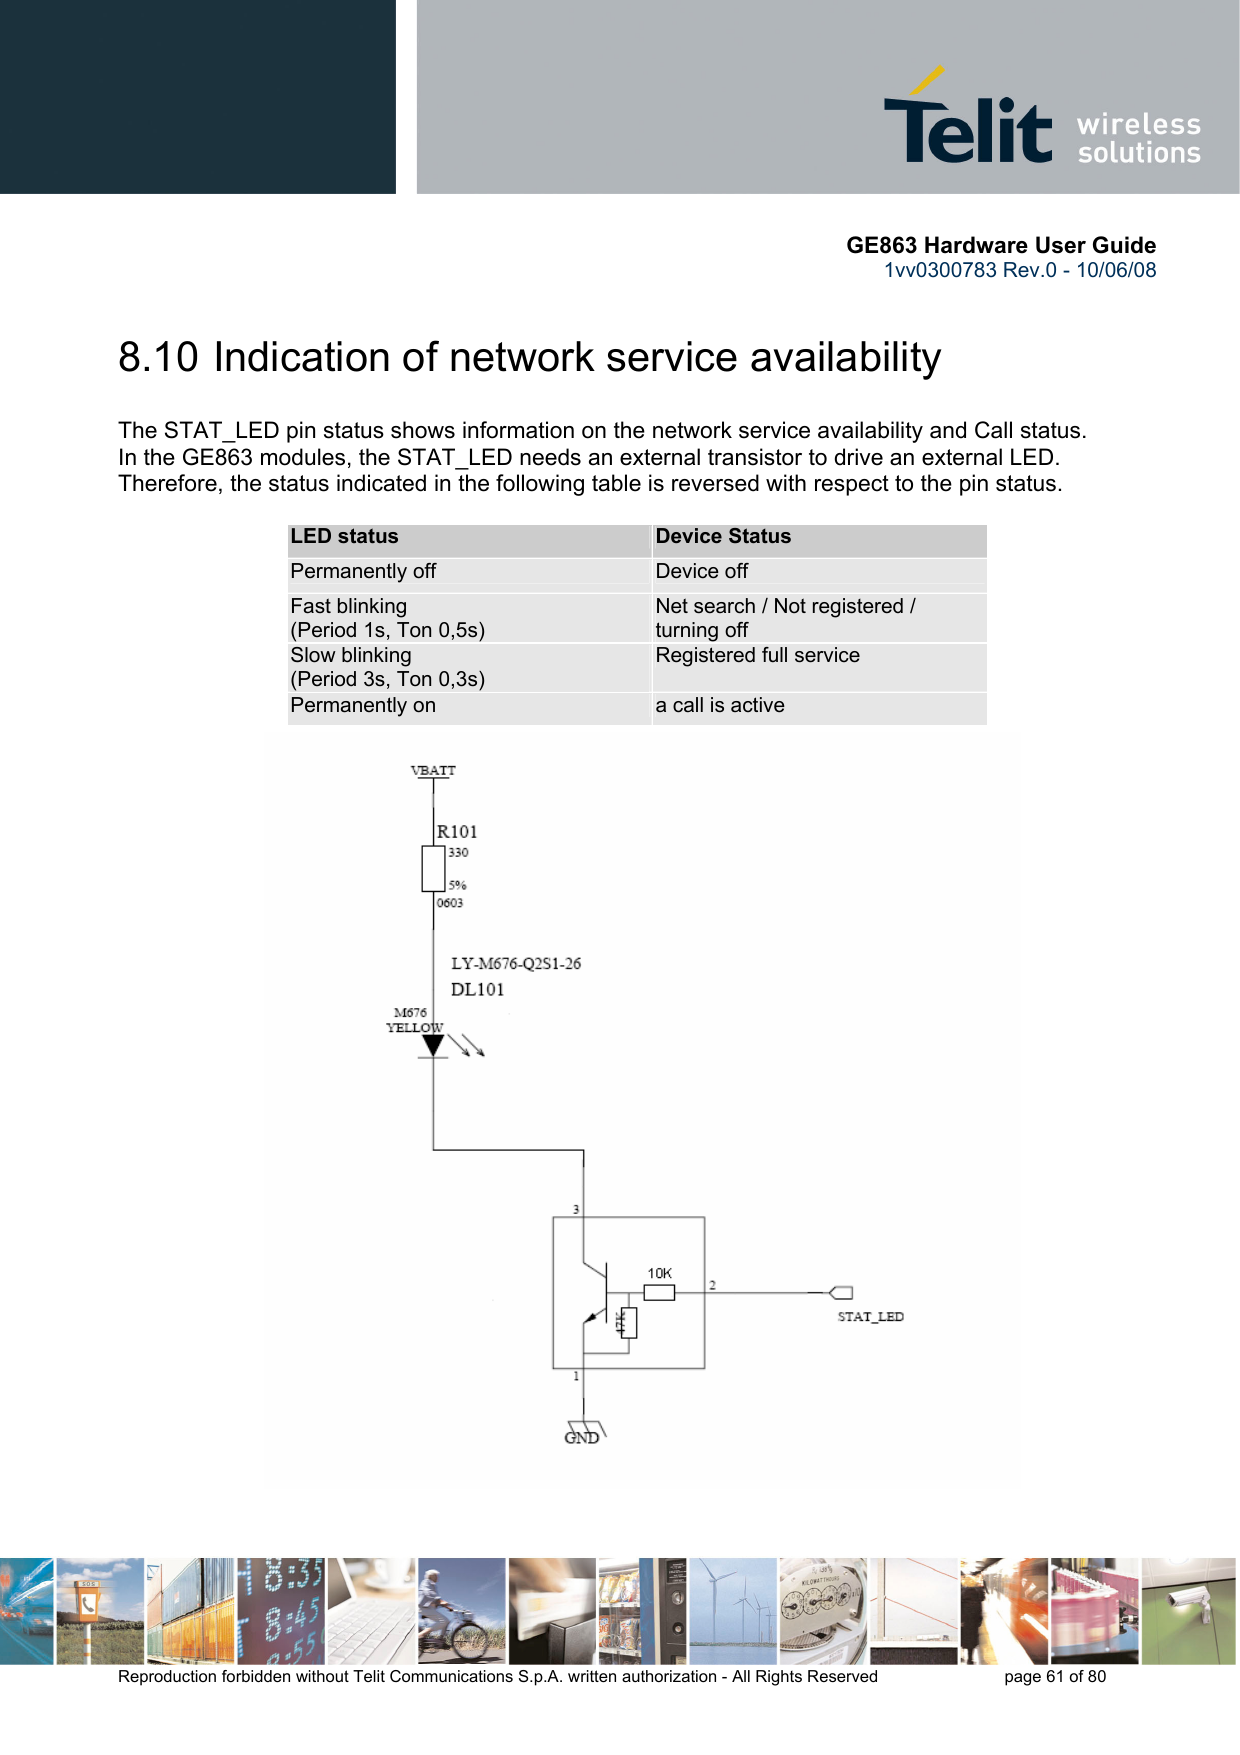       GE863 Hardware User Guide 1vv0300783 Rev.0 - 10/06/08 Reproduction forbidden without Telit Communications S.p.A. written authorization - All Rights Reserved    page 61 of 80  8.10  Indication of network service availability The STAT_LED pin status shows information on the network service availability and Call status.  In the GE863 modules, the STAT_LED needs an external transistor to drive an external LED. Therefore, the status indicated in the following table is reversed with respect to the pin status.             LED status  Device Status Permanently off  Device off Fast blinking  (Period 1s, Ton 0,5s) Net search / Not registered / turning off Slow blinking (Period 3s, Ton 0,3s) Registered full service Permanently on  a call is active        